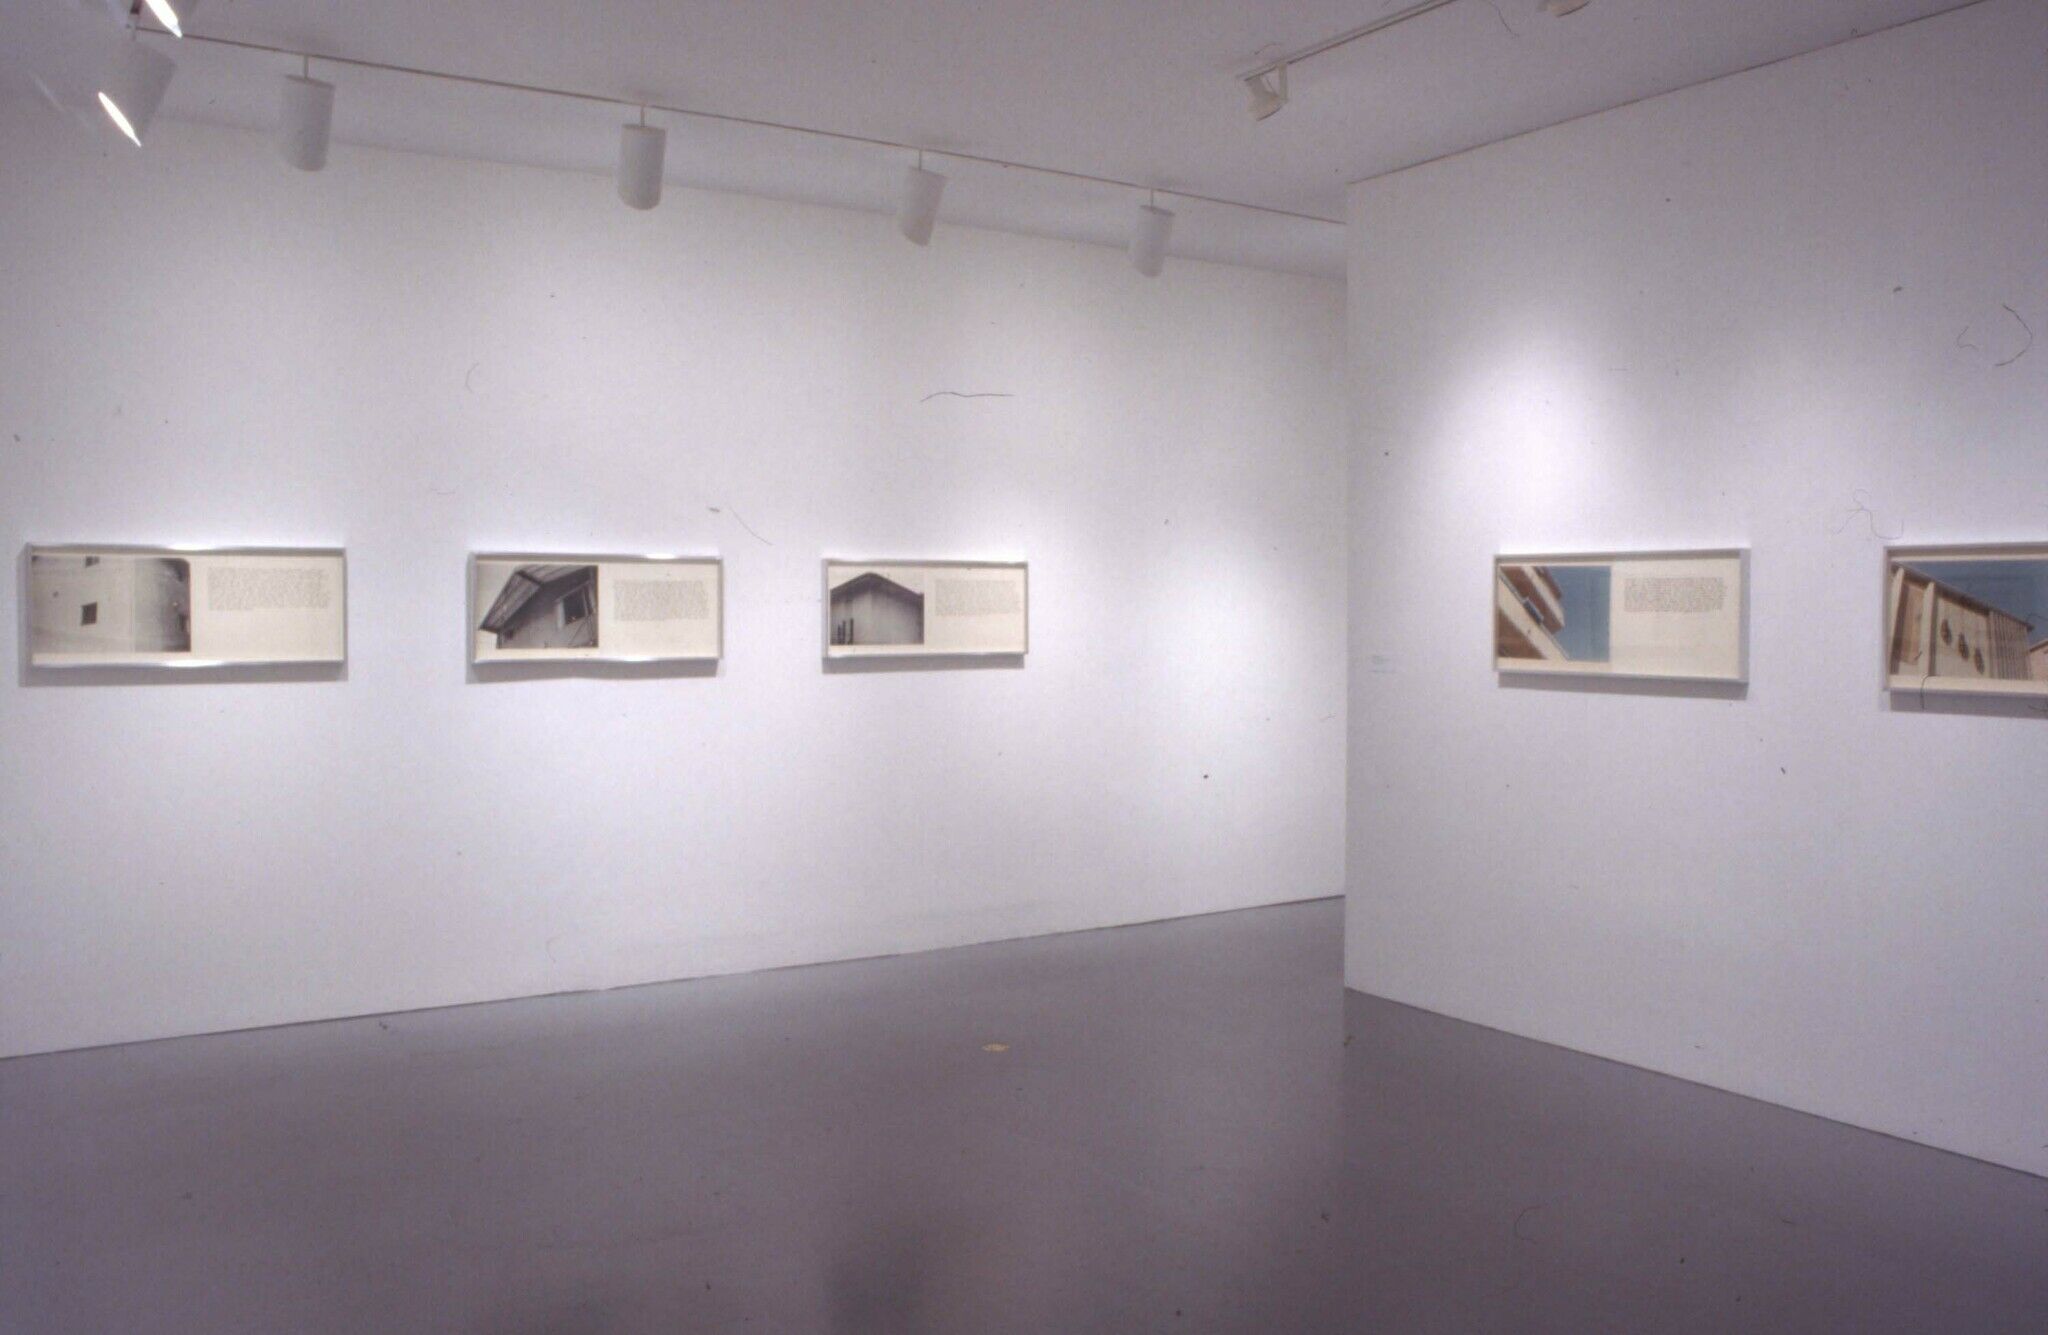 A series of architectural photography displayed alongside text in a gallery.